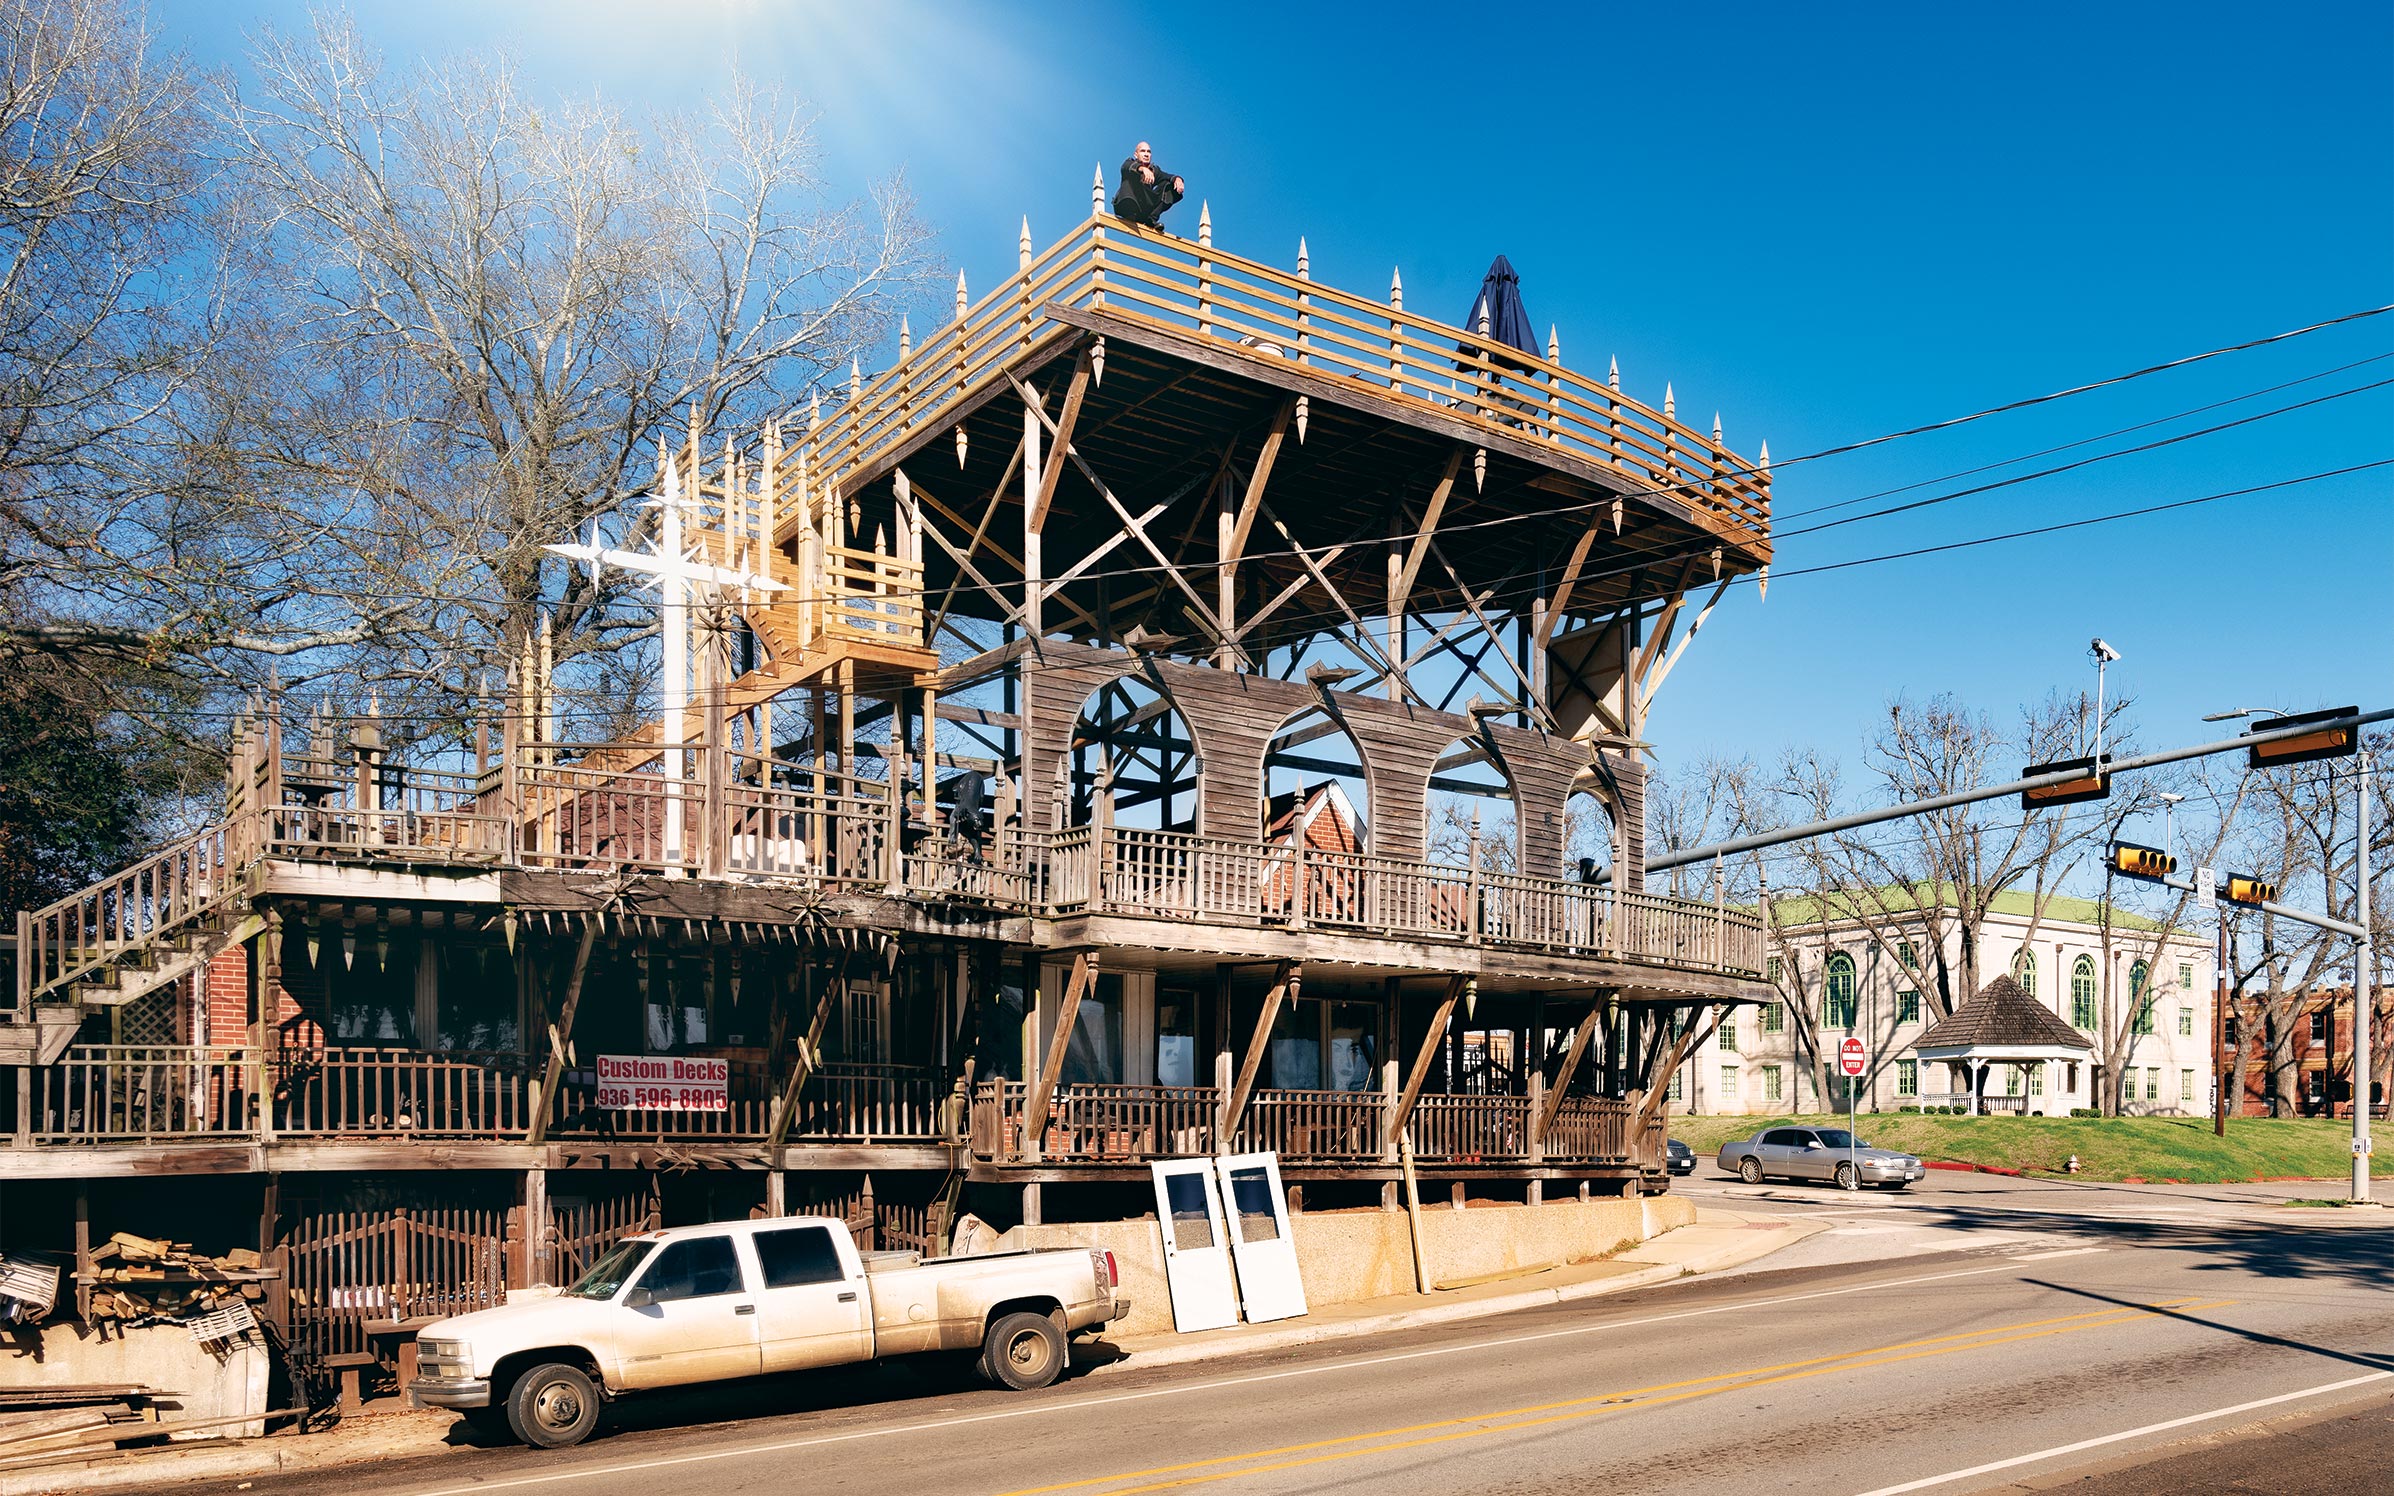 For Years, an East Texas Carpenter Has Been Building a Gothic Contraption of Decks and Spikes in a Historic Square pic